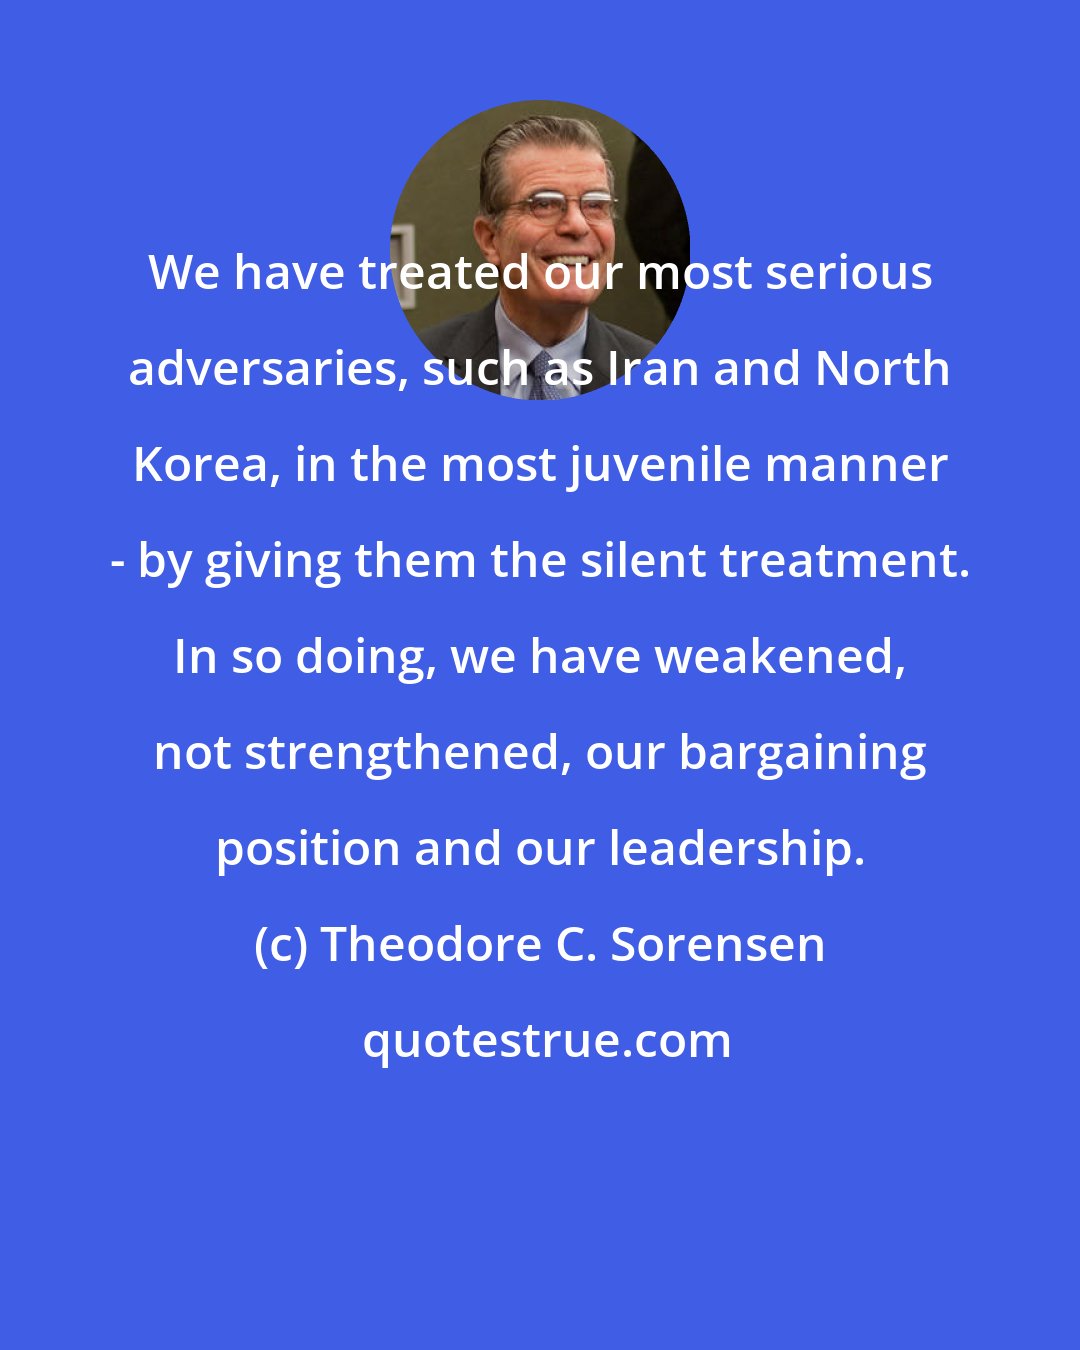 Theodore C. Sorensen: We have treated our most serious adversaries, such as Iran and North Korea, in the most juvenile manner - by giving them the silent treatment. In so doing, we have weakened, not strengthened, our bargaining position and our leadership.